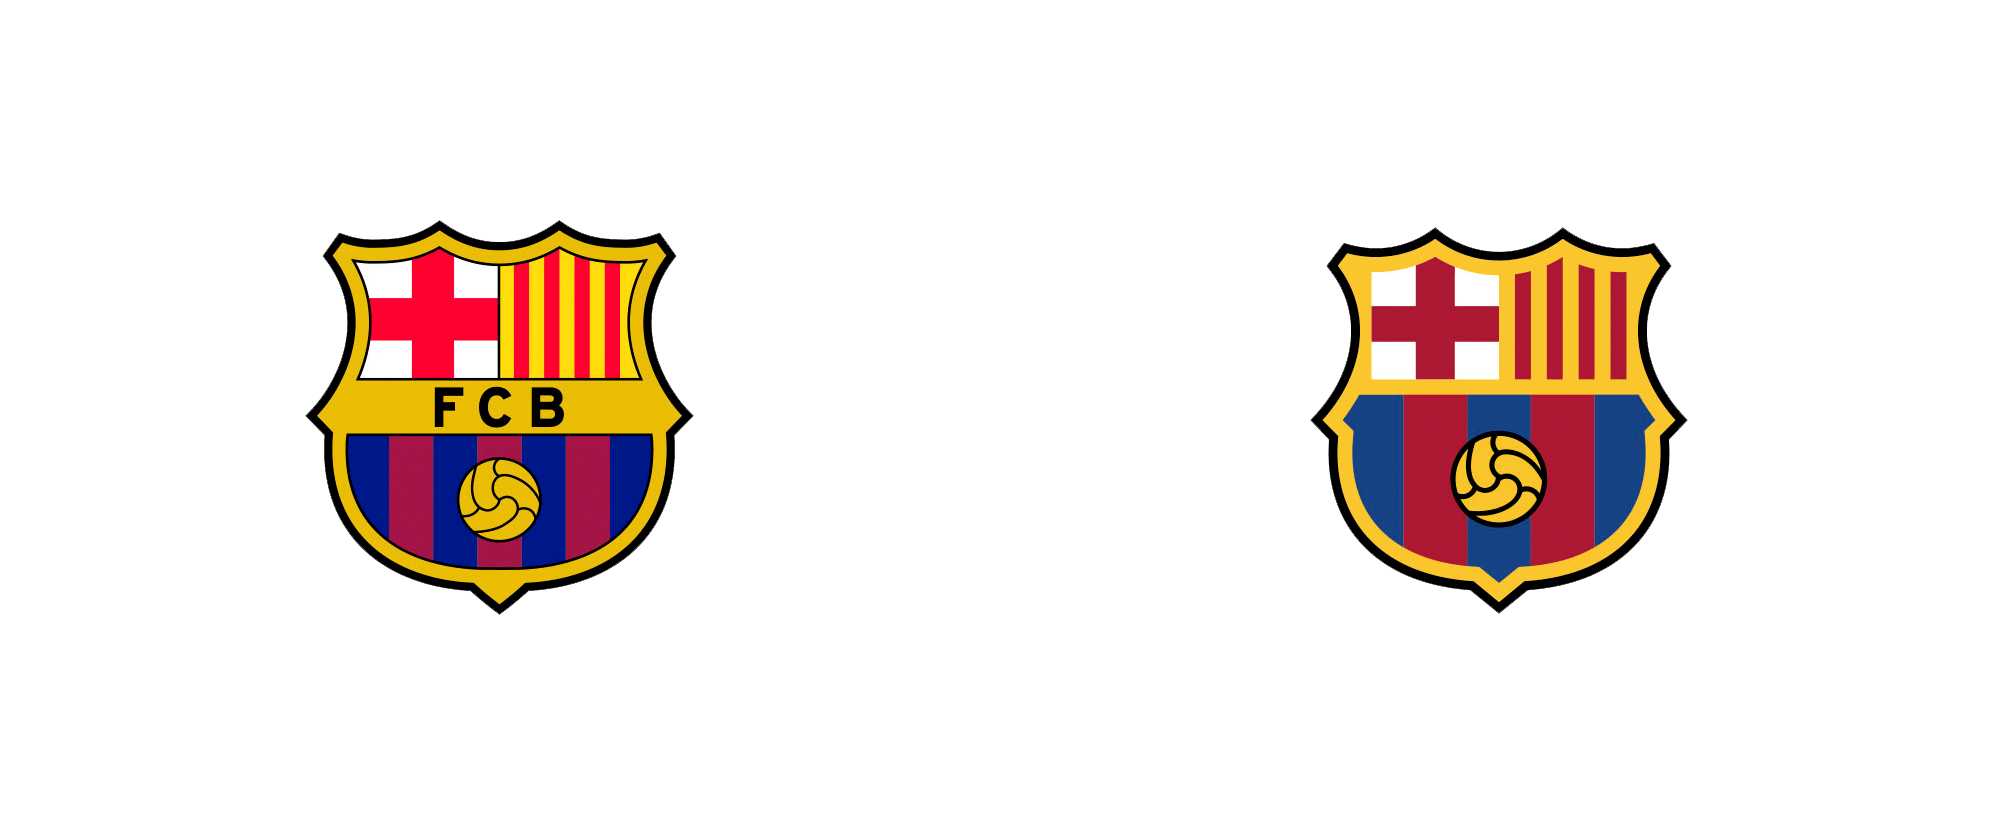 White with Red Cross Logistics Firm Logo - Brand New: New Crest and Identity for FC Barcelona by Summa